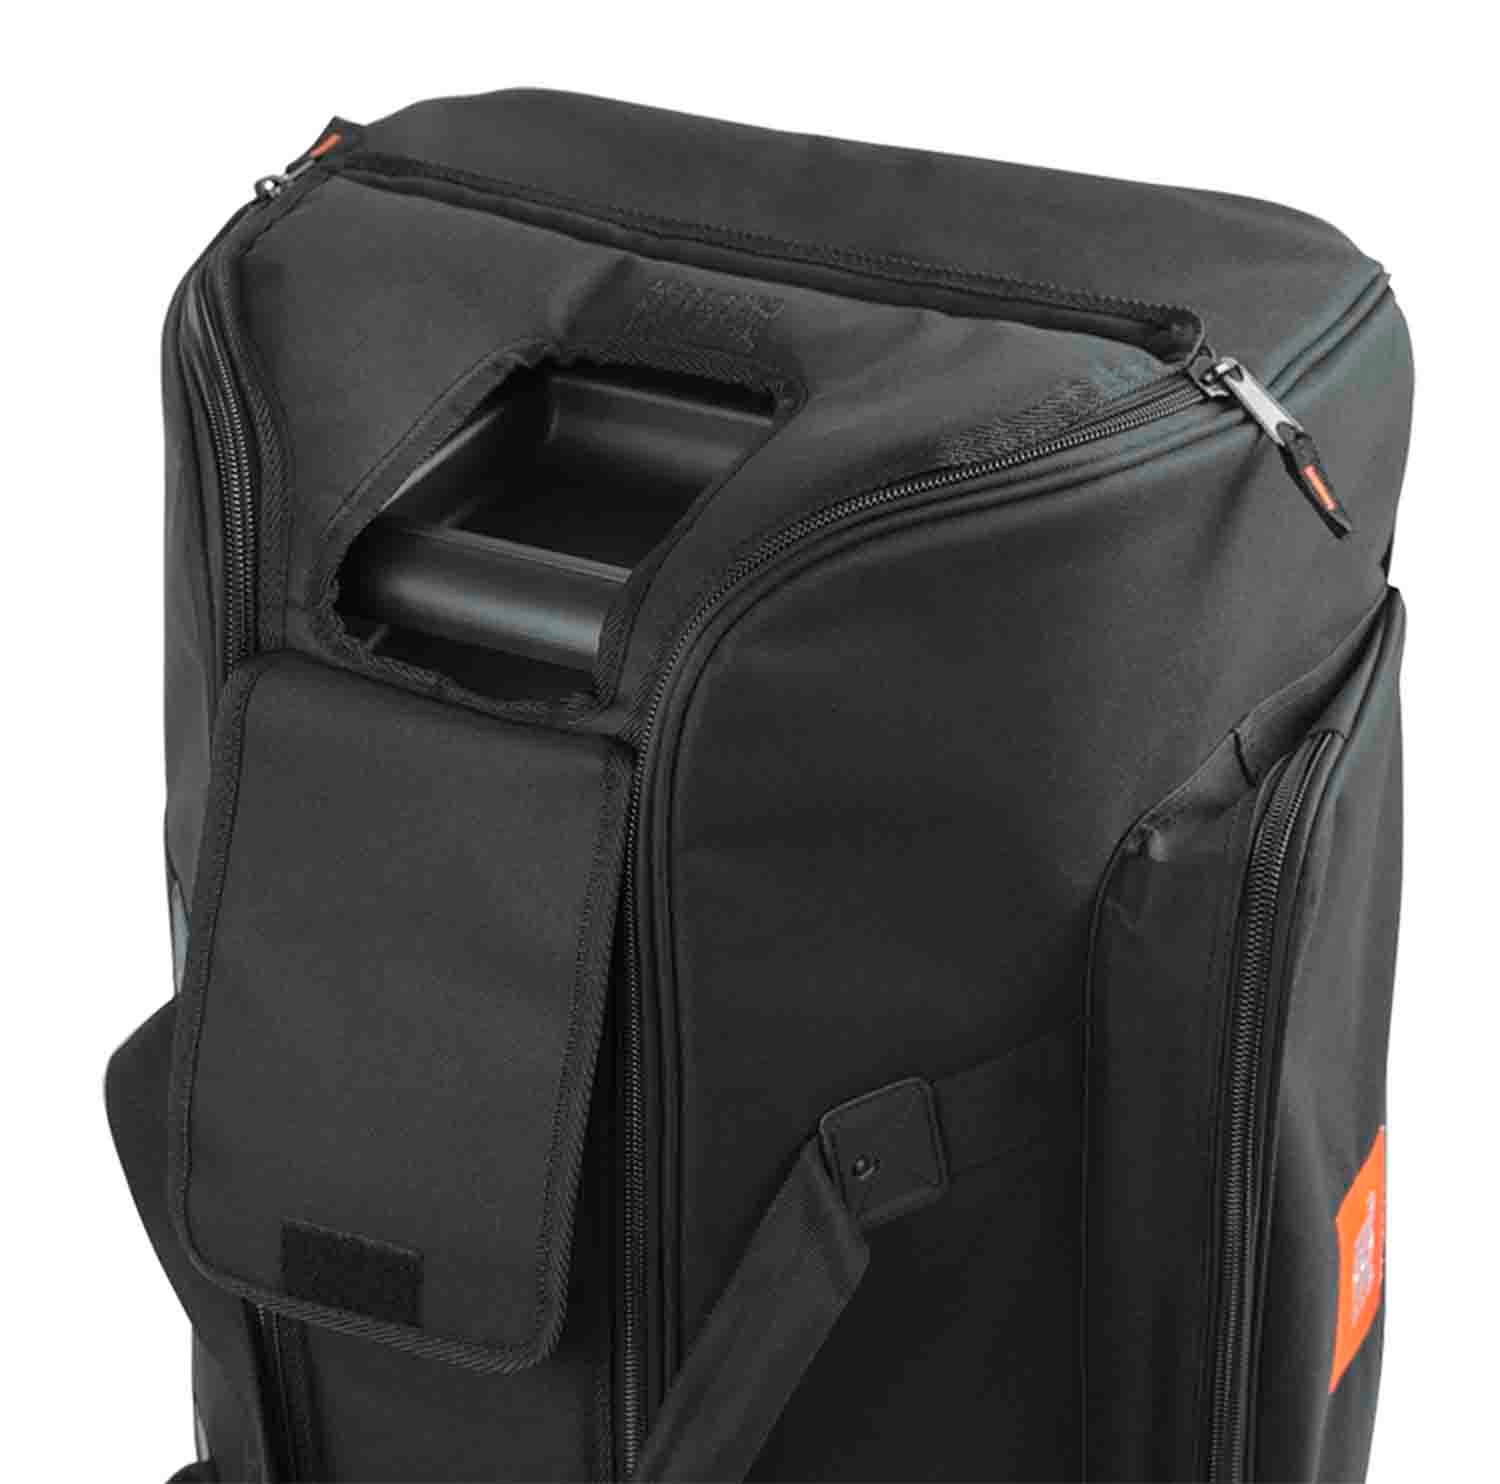 B-Stock: JBL EON612-BAG Deluxe Carry Bag with 10mm Padding and Dual Access Zippers - Hollywood DJ